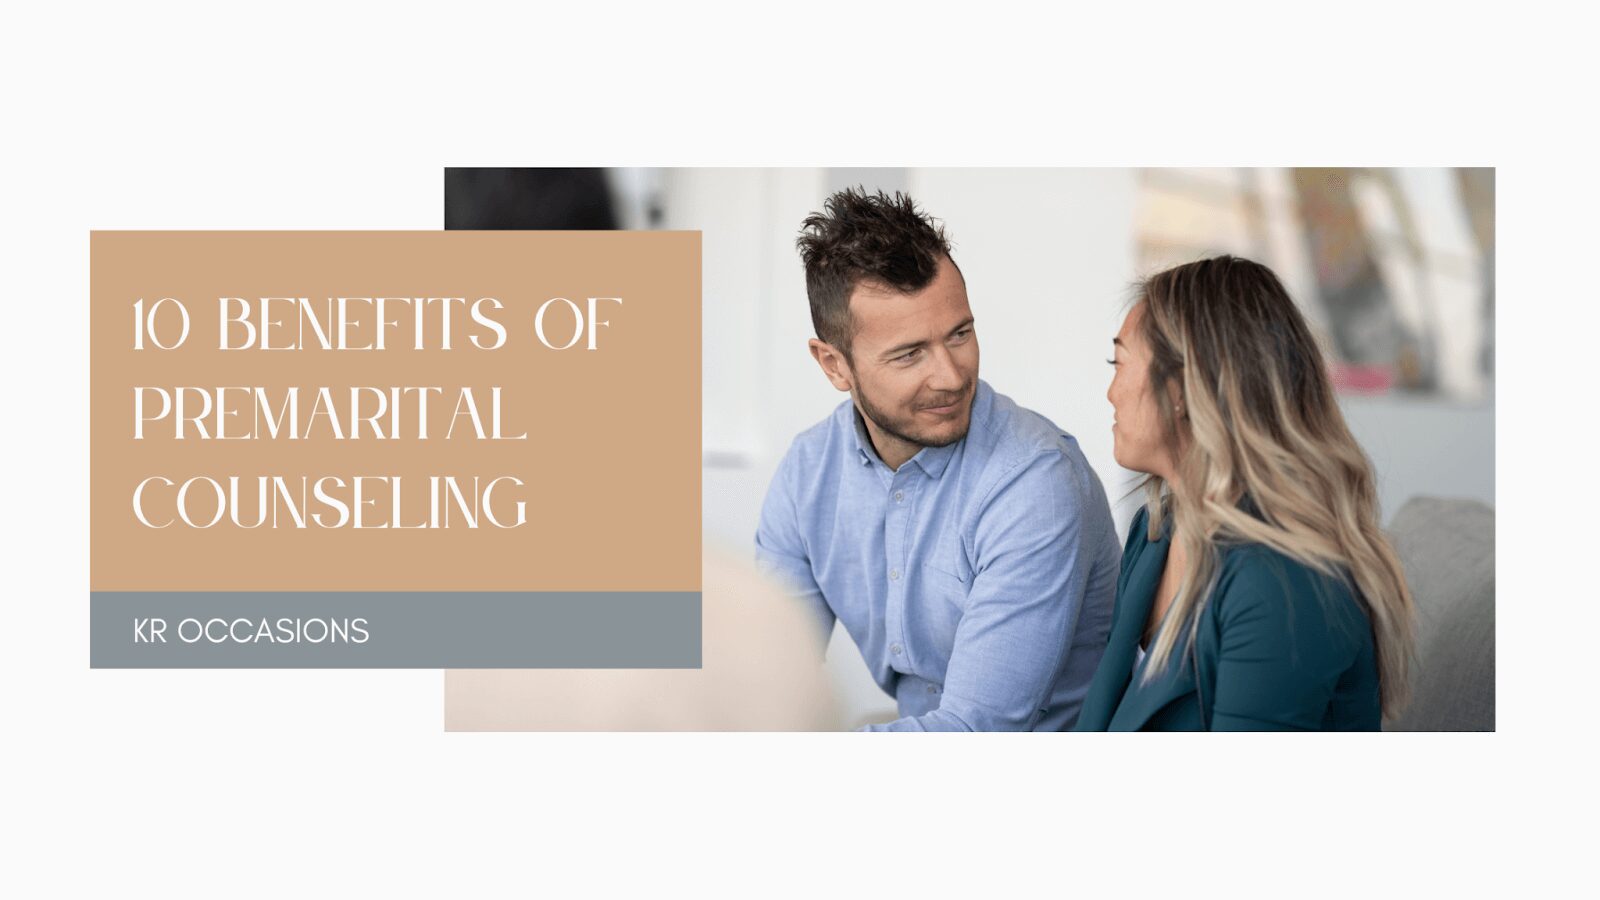 10 Benefits of Premarital Counseling